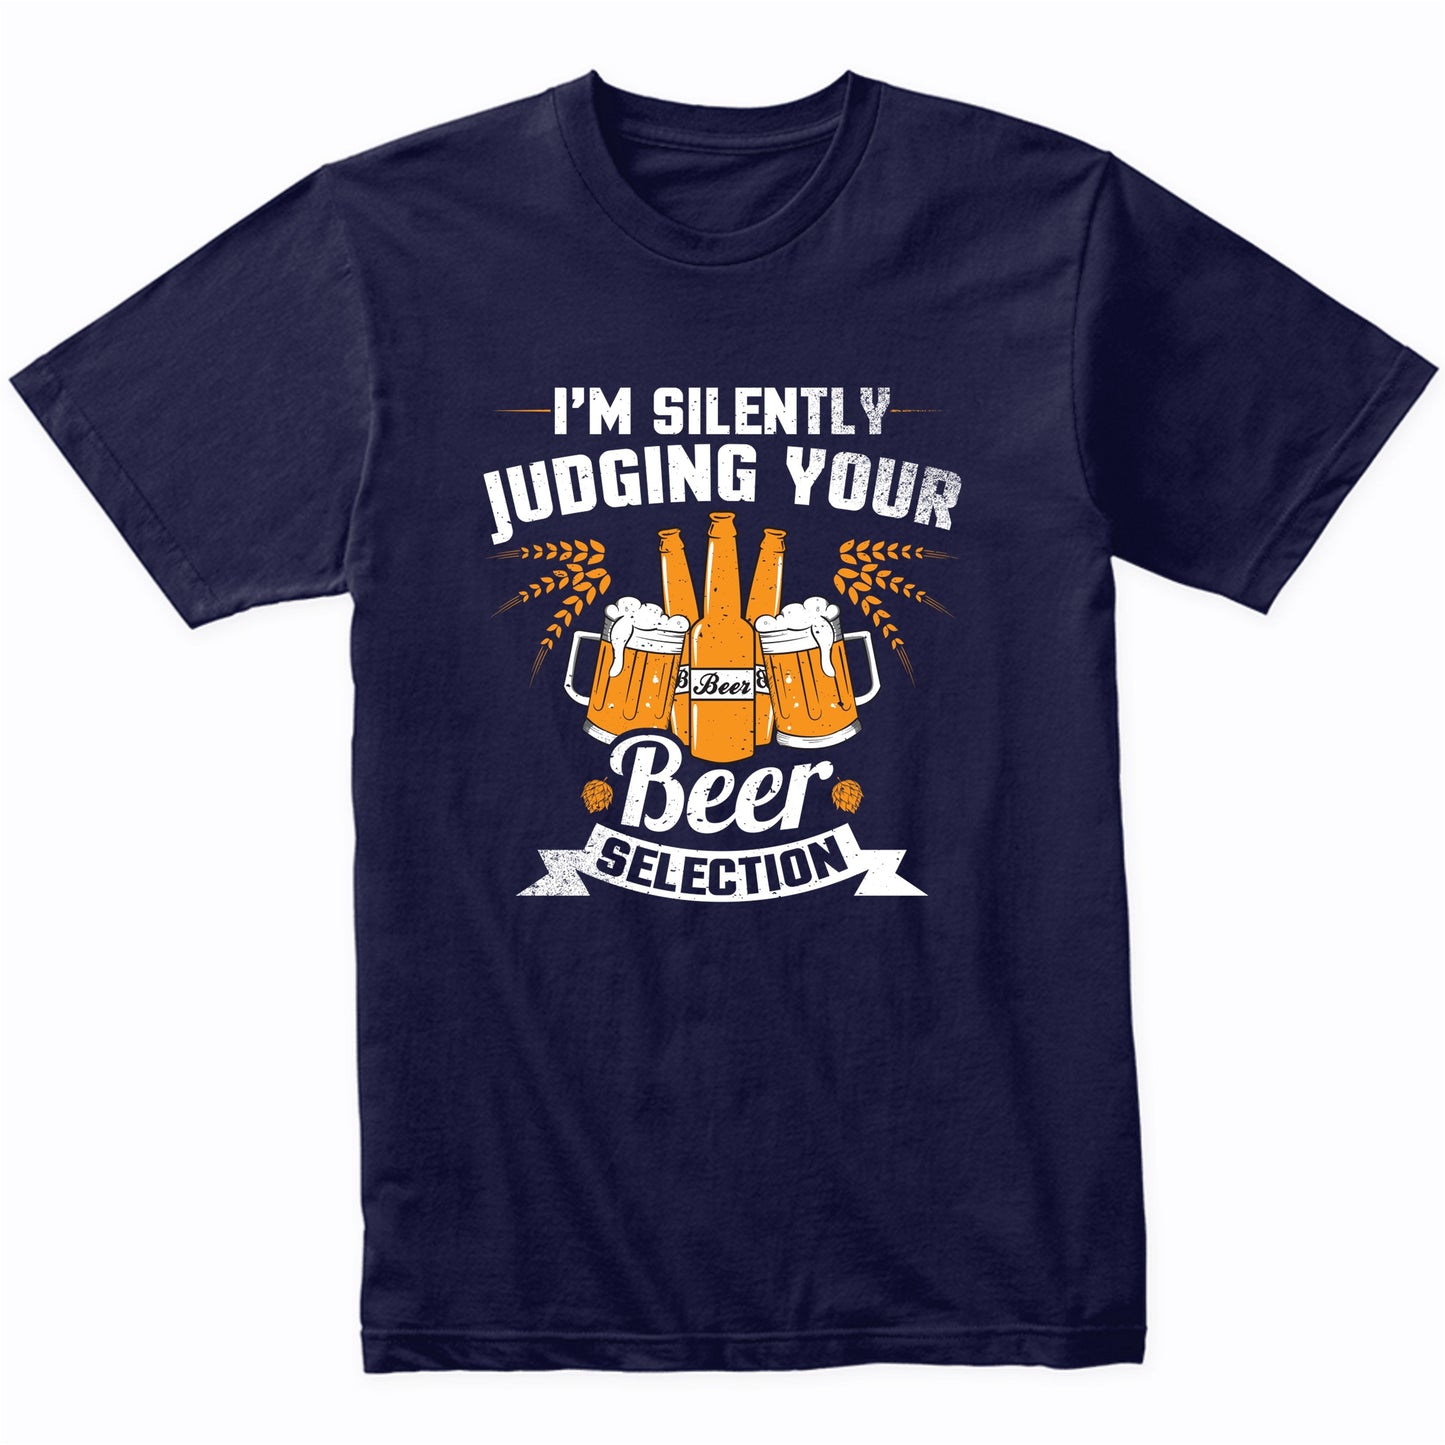 I'm Silently Judging Your Beer Selection Funny Beer Shirt